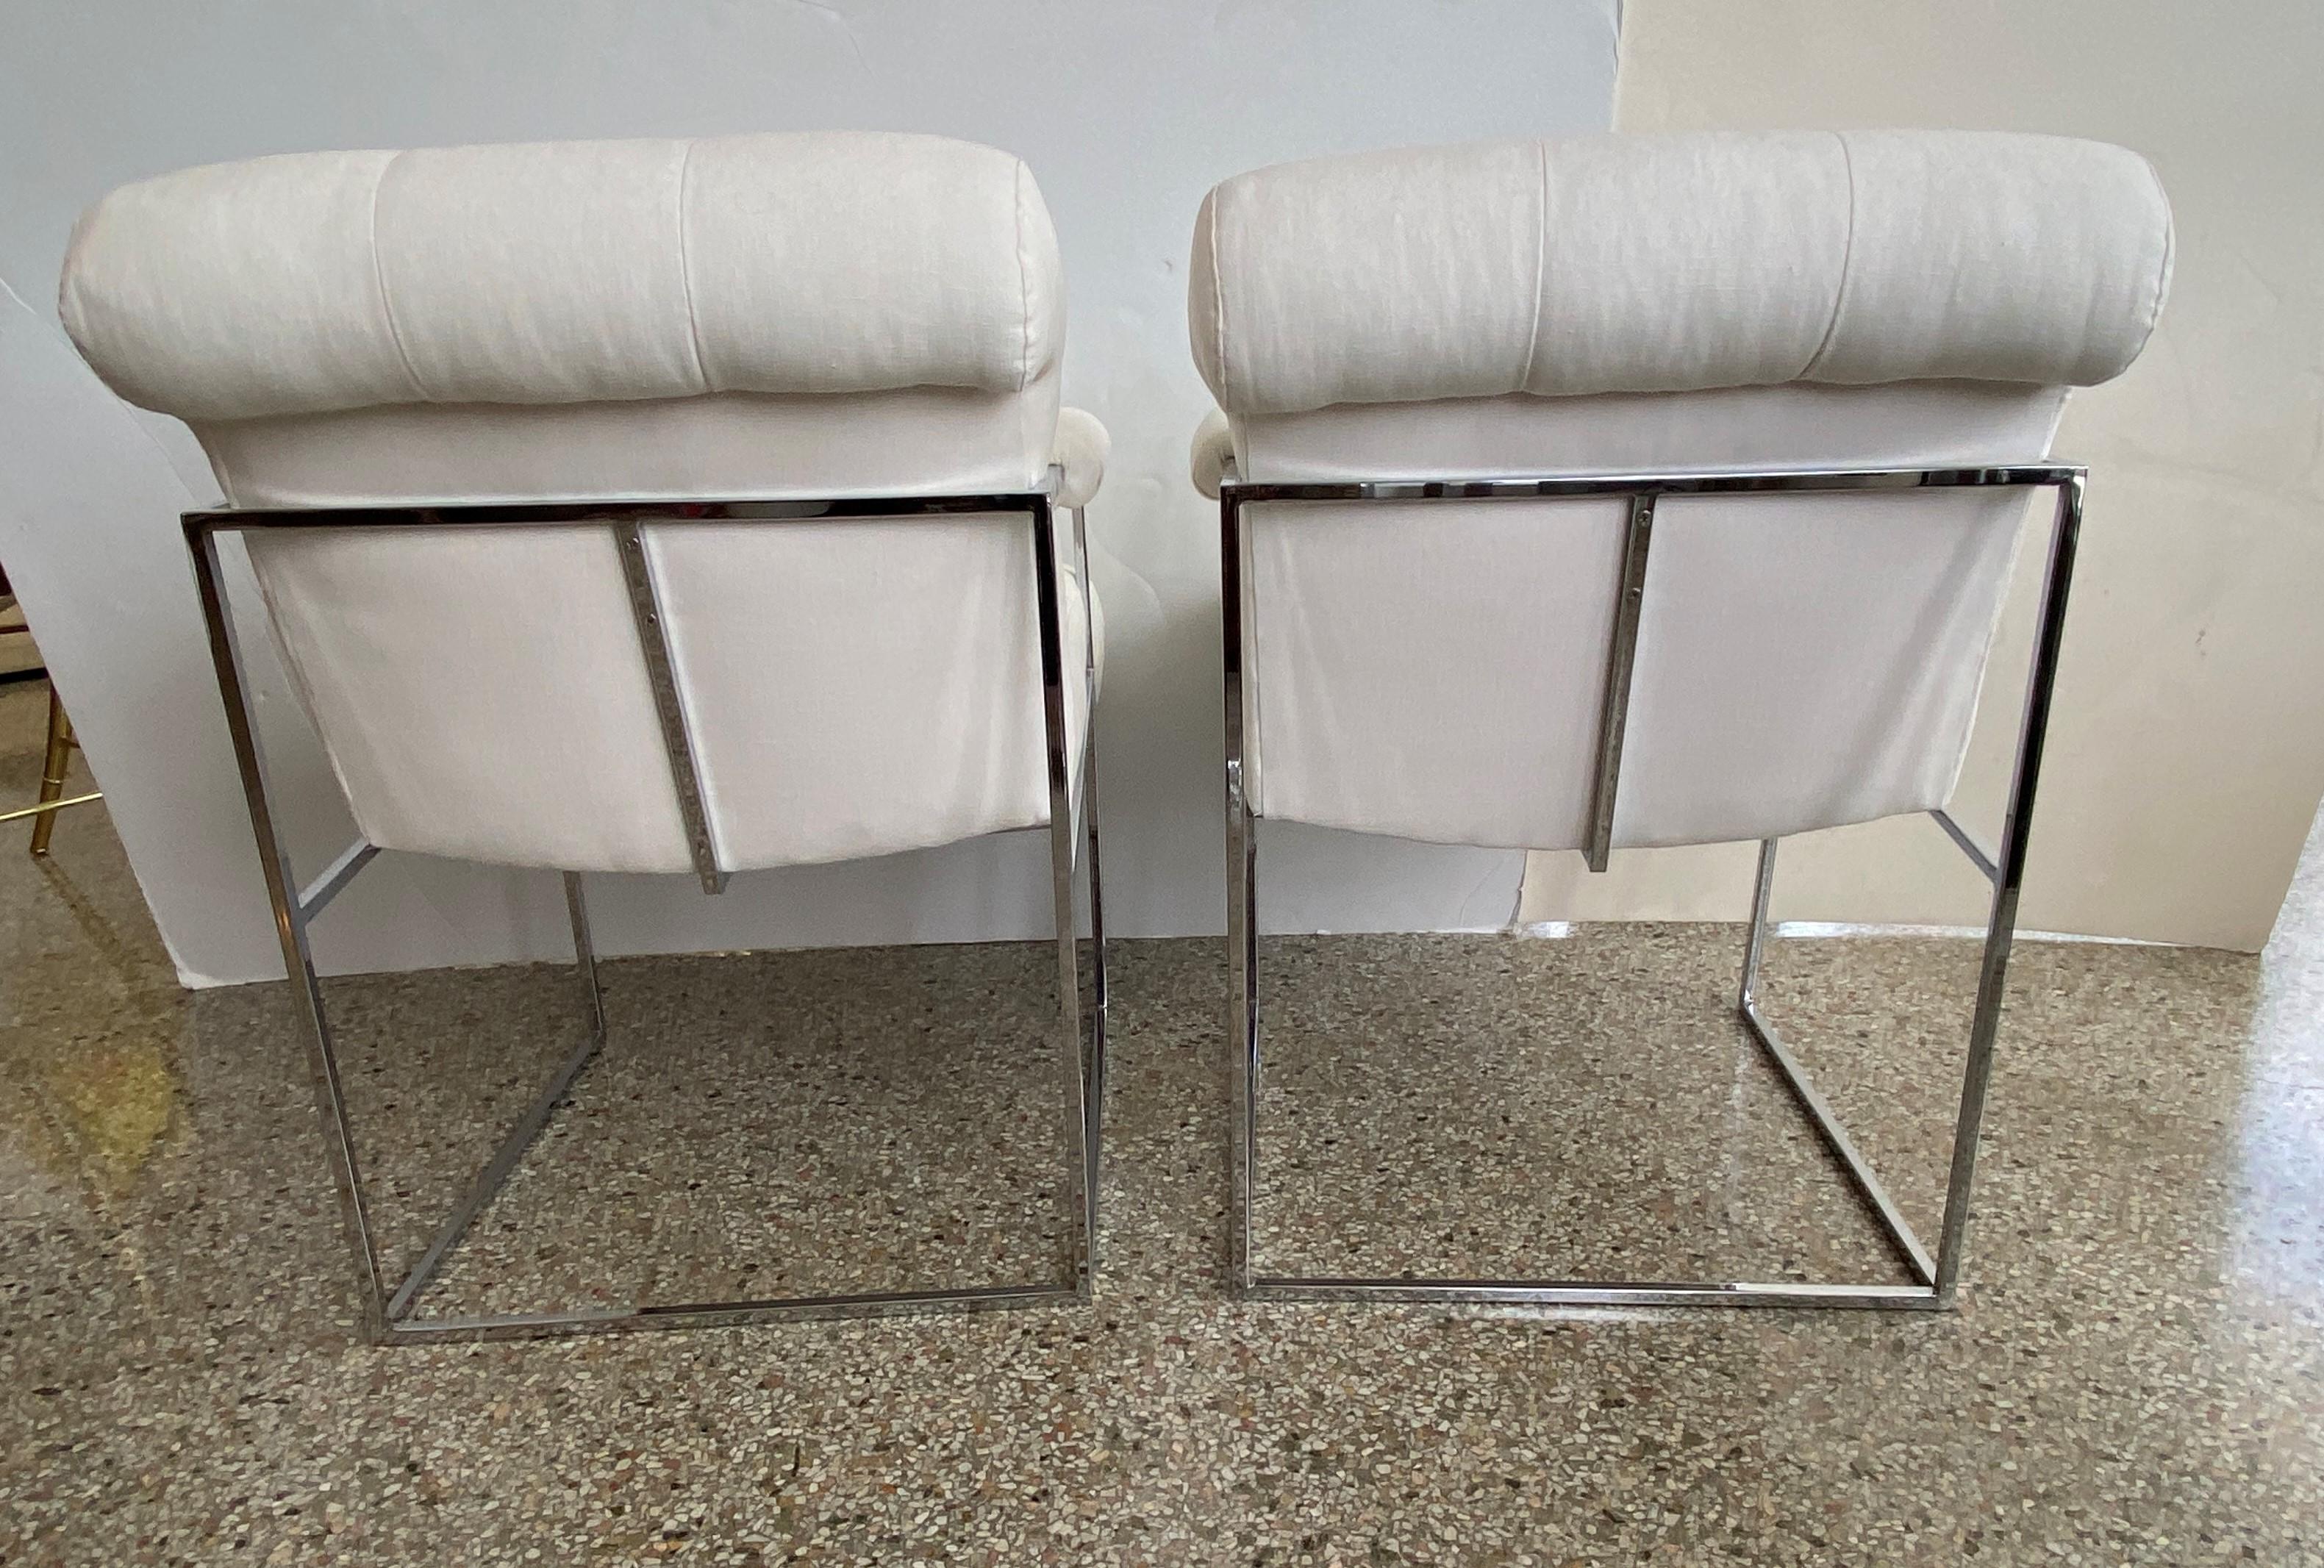 Pair of Milo Baughman Thin Line Chairs in Polished Chrome For Sale 5